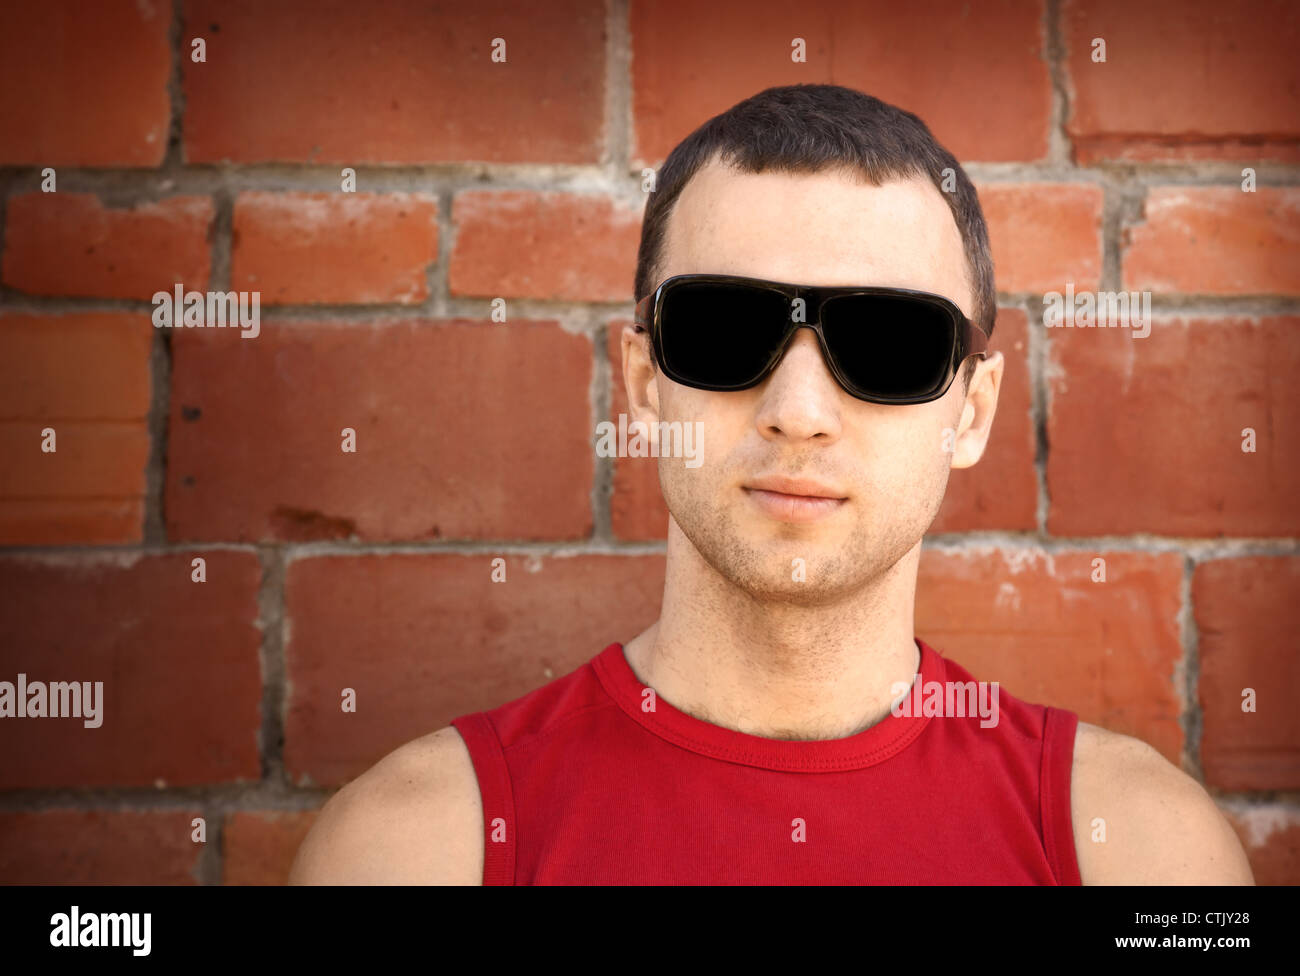 Closeup portrait of young man in black sunglasses over old brick wall Stock Photo